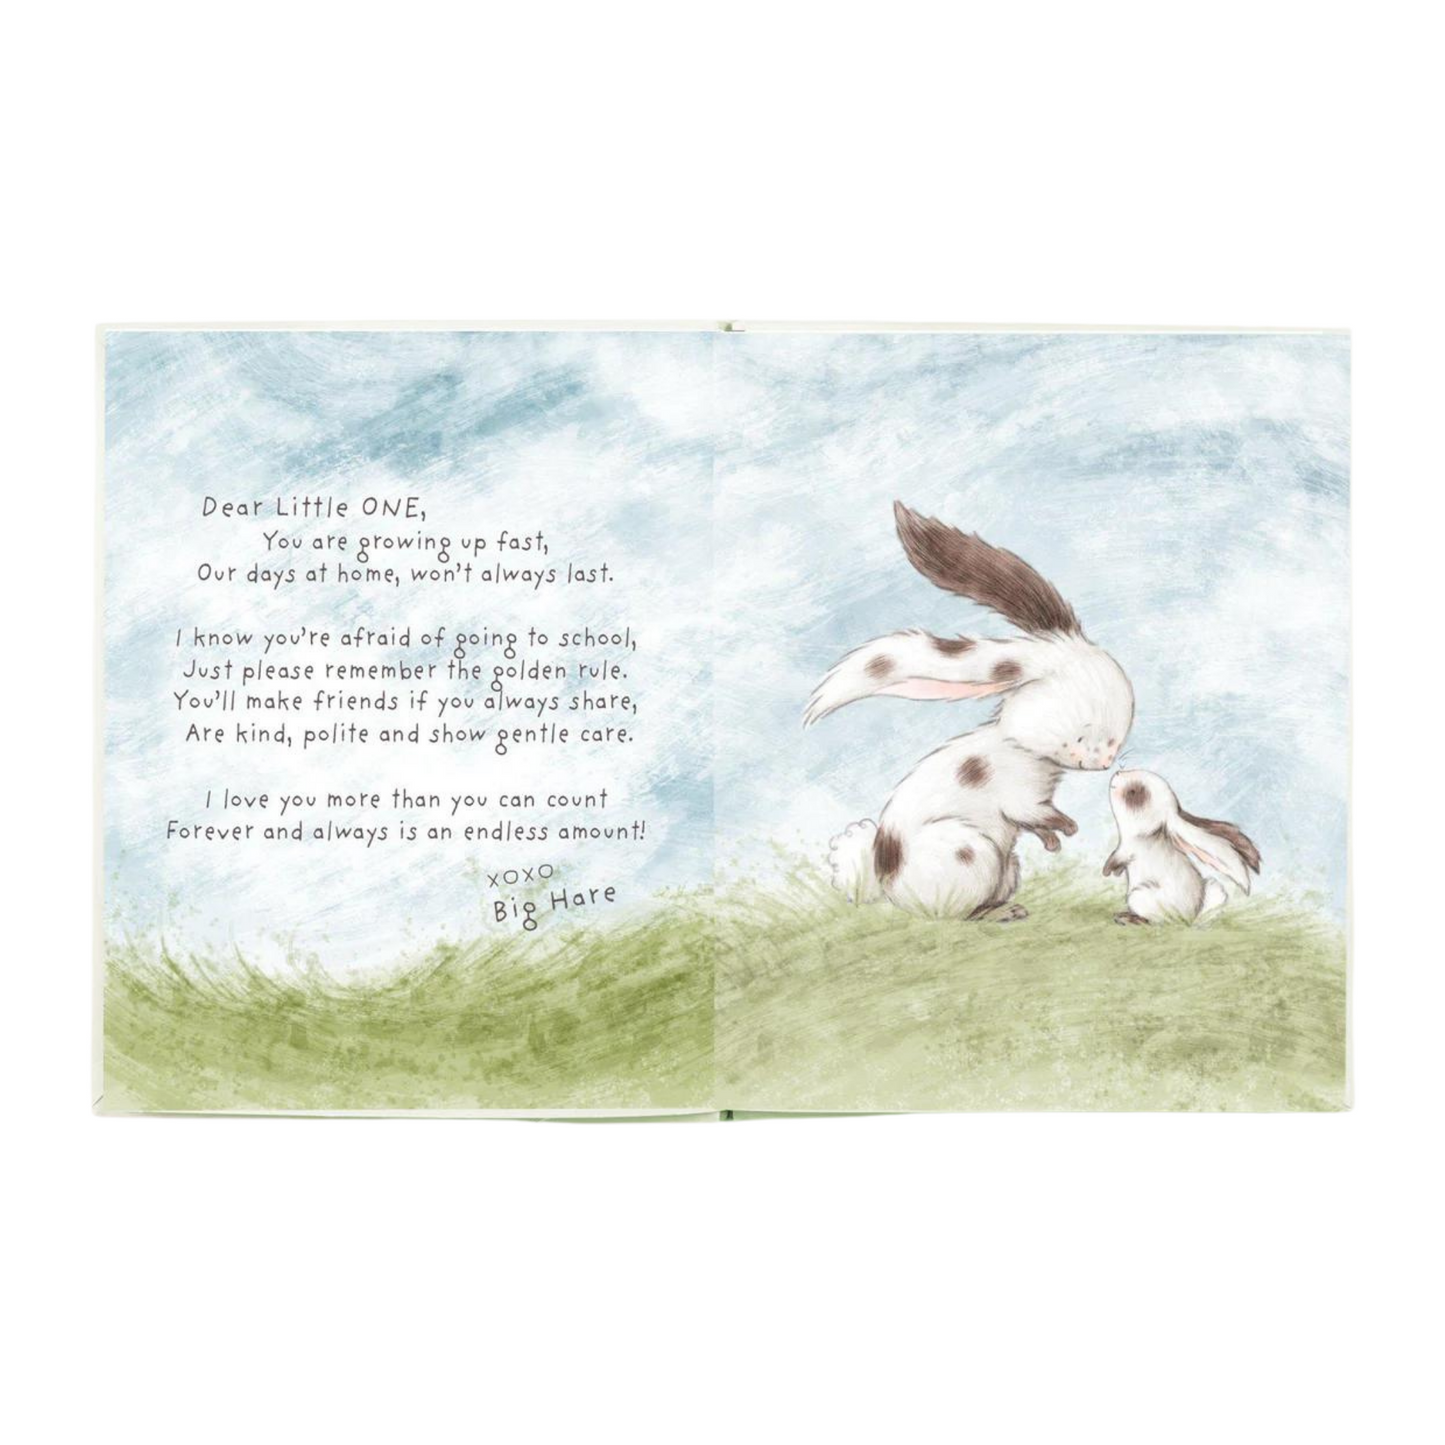 Every Hare Counts Book and Herbie Hare Soft Toy